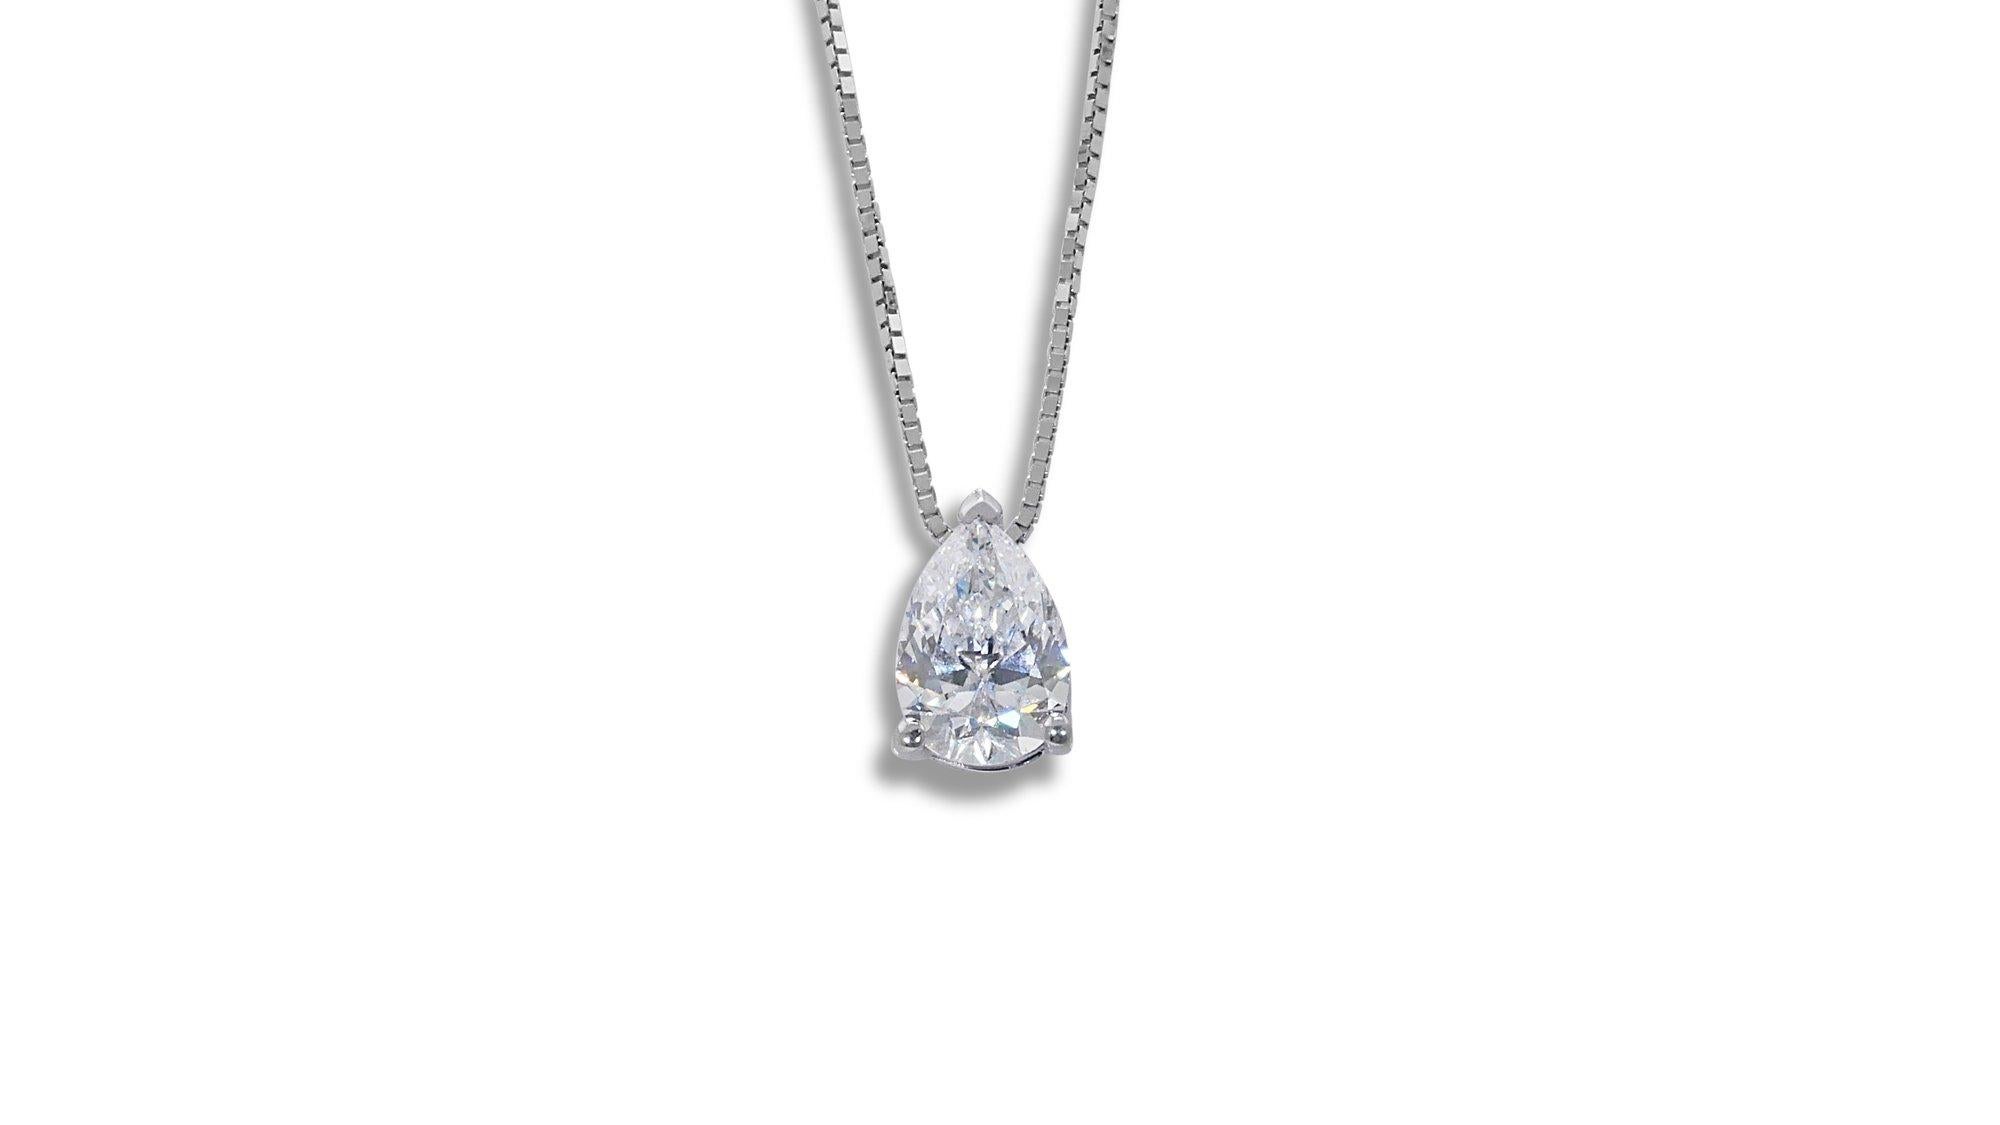 Pear Cut Dazzling 18k White Gold Pendant Necklace with a 0.90 carat brilliant diamond For Sale